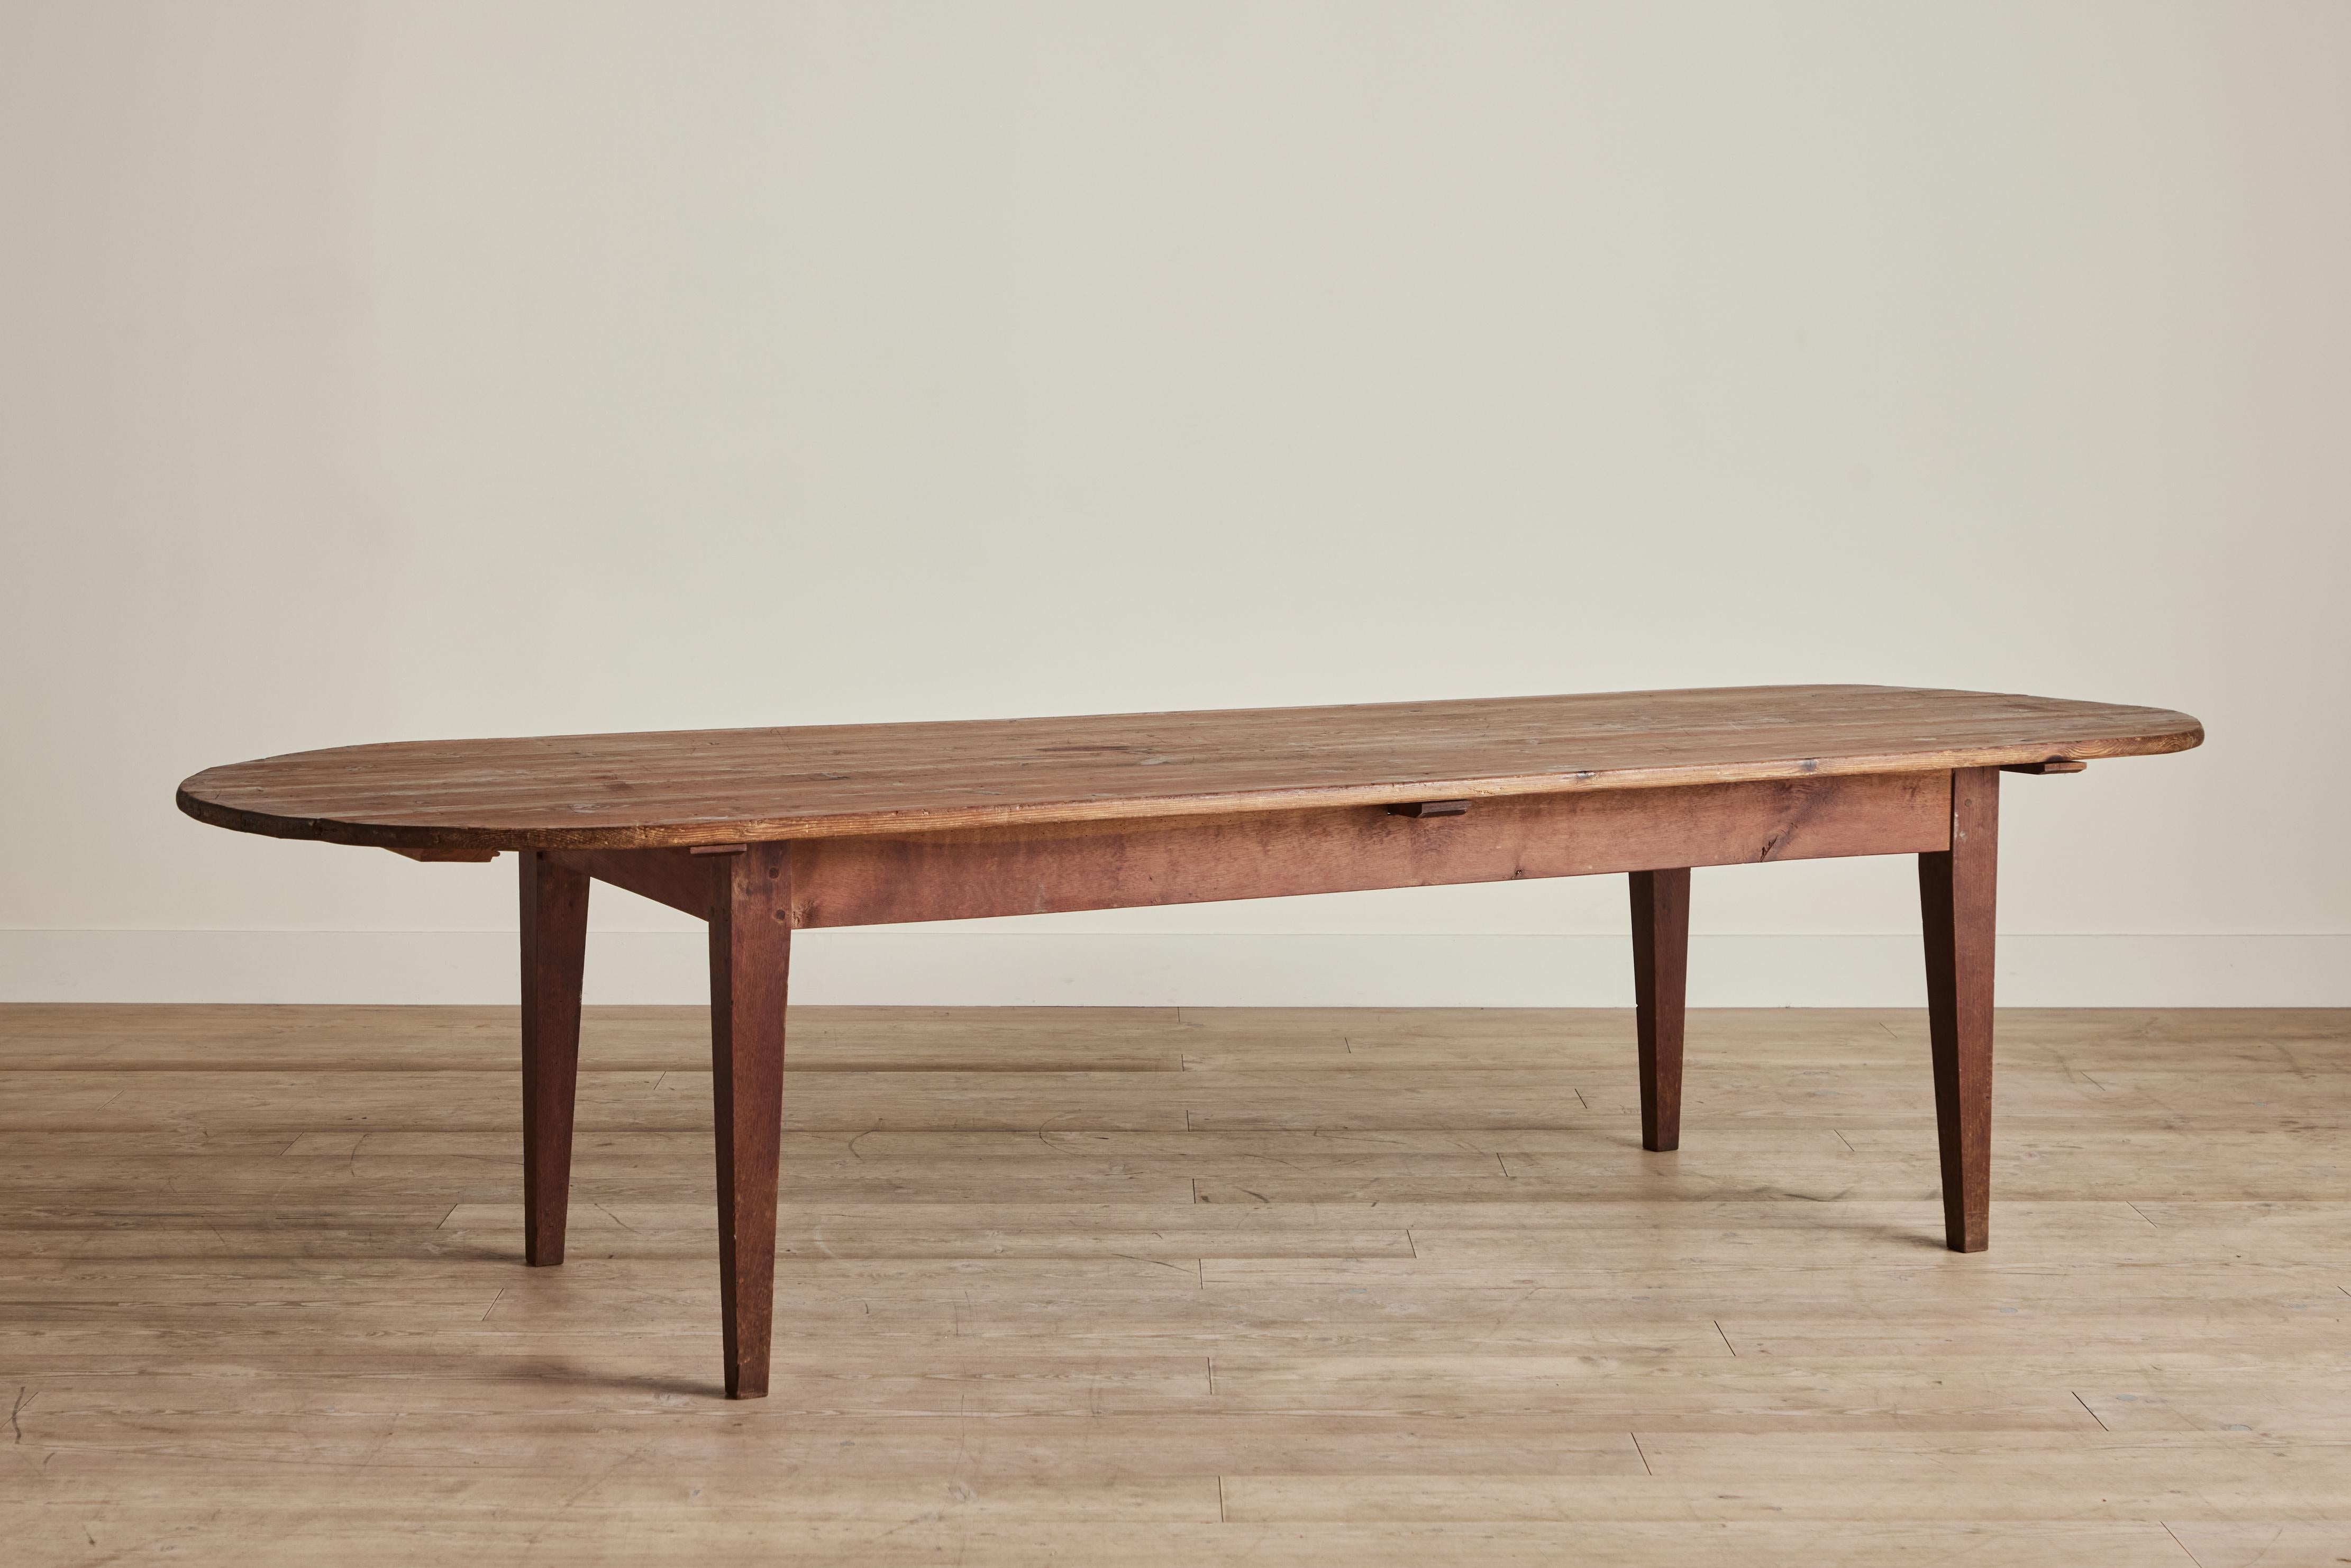 Rustic wood dining table from France circa 1900. This large oval top table measures 118 inches in length. Wear throughout on wood is consistent with age and use. 